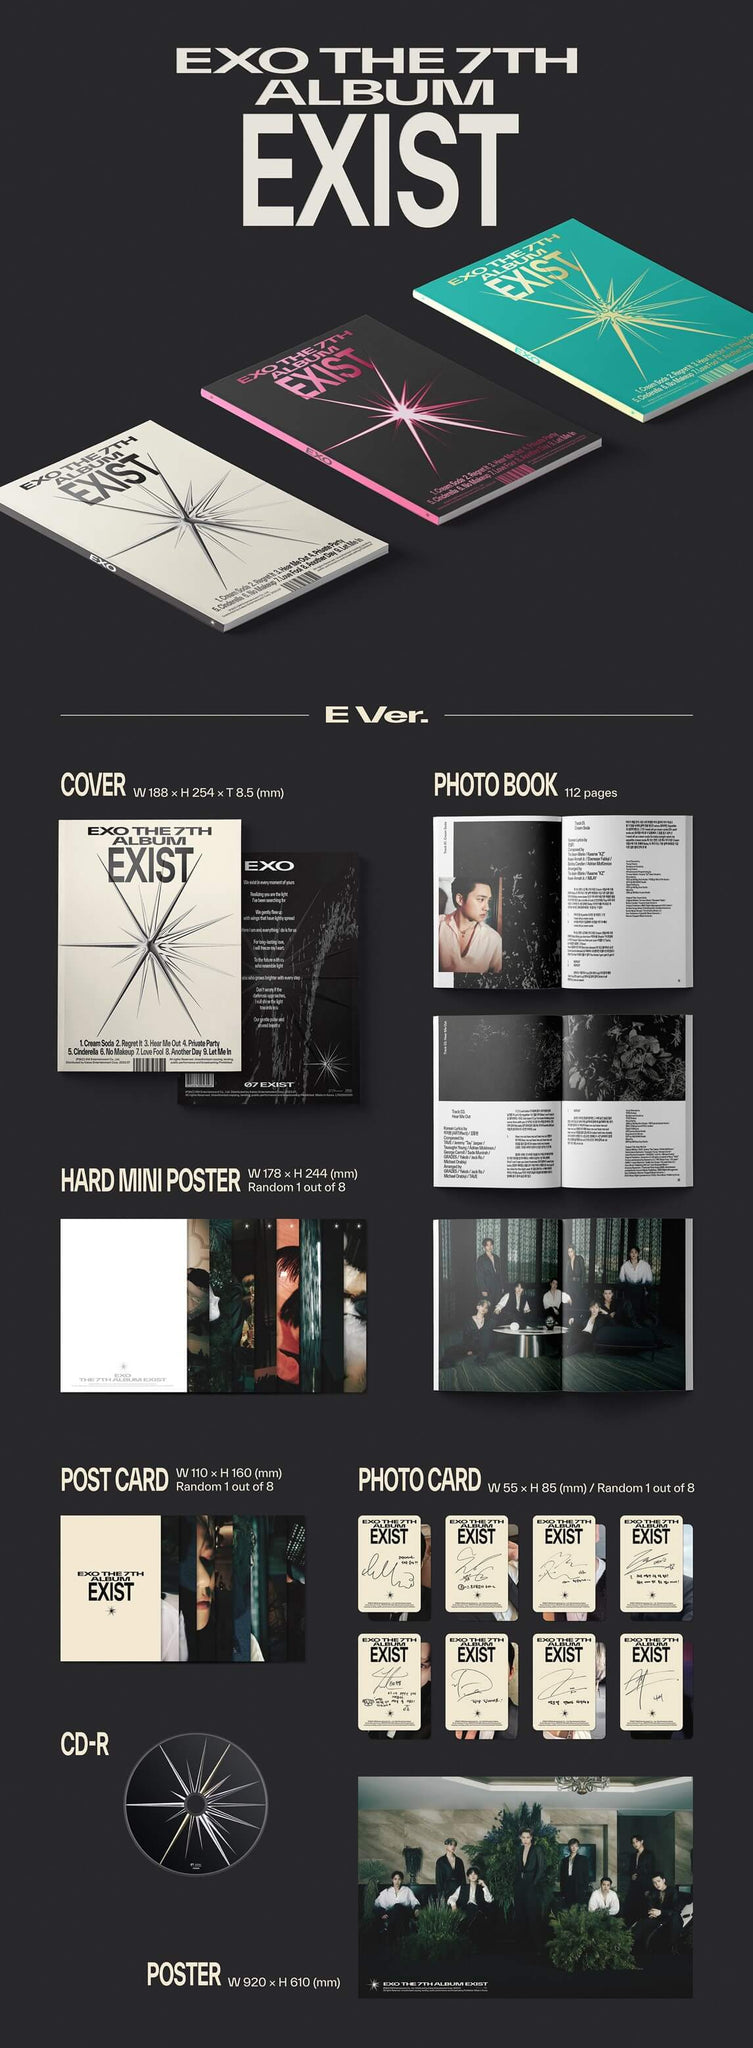 EXO EXIST - E Version Inclusions Cover Photobook CD Postcard Photocard Hard Mini Poster 1st Press Only Poster